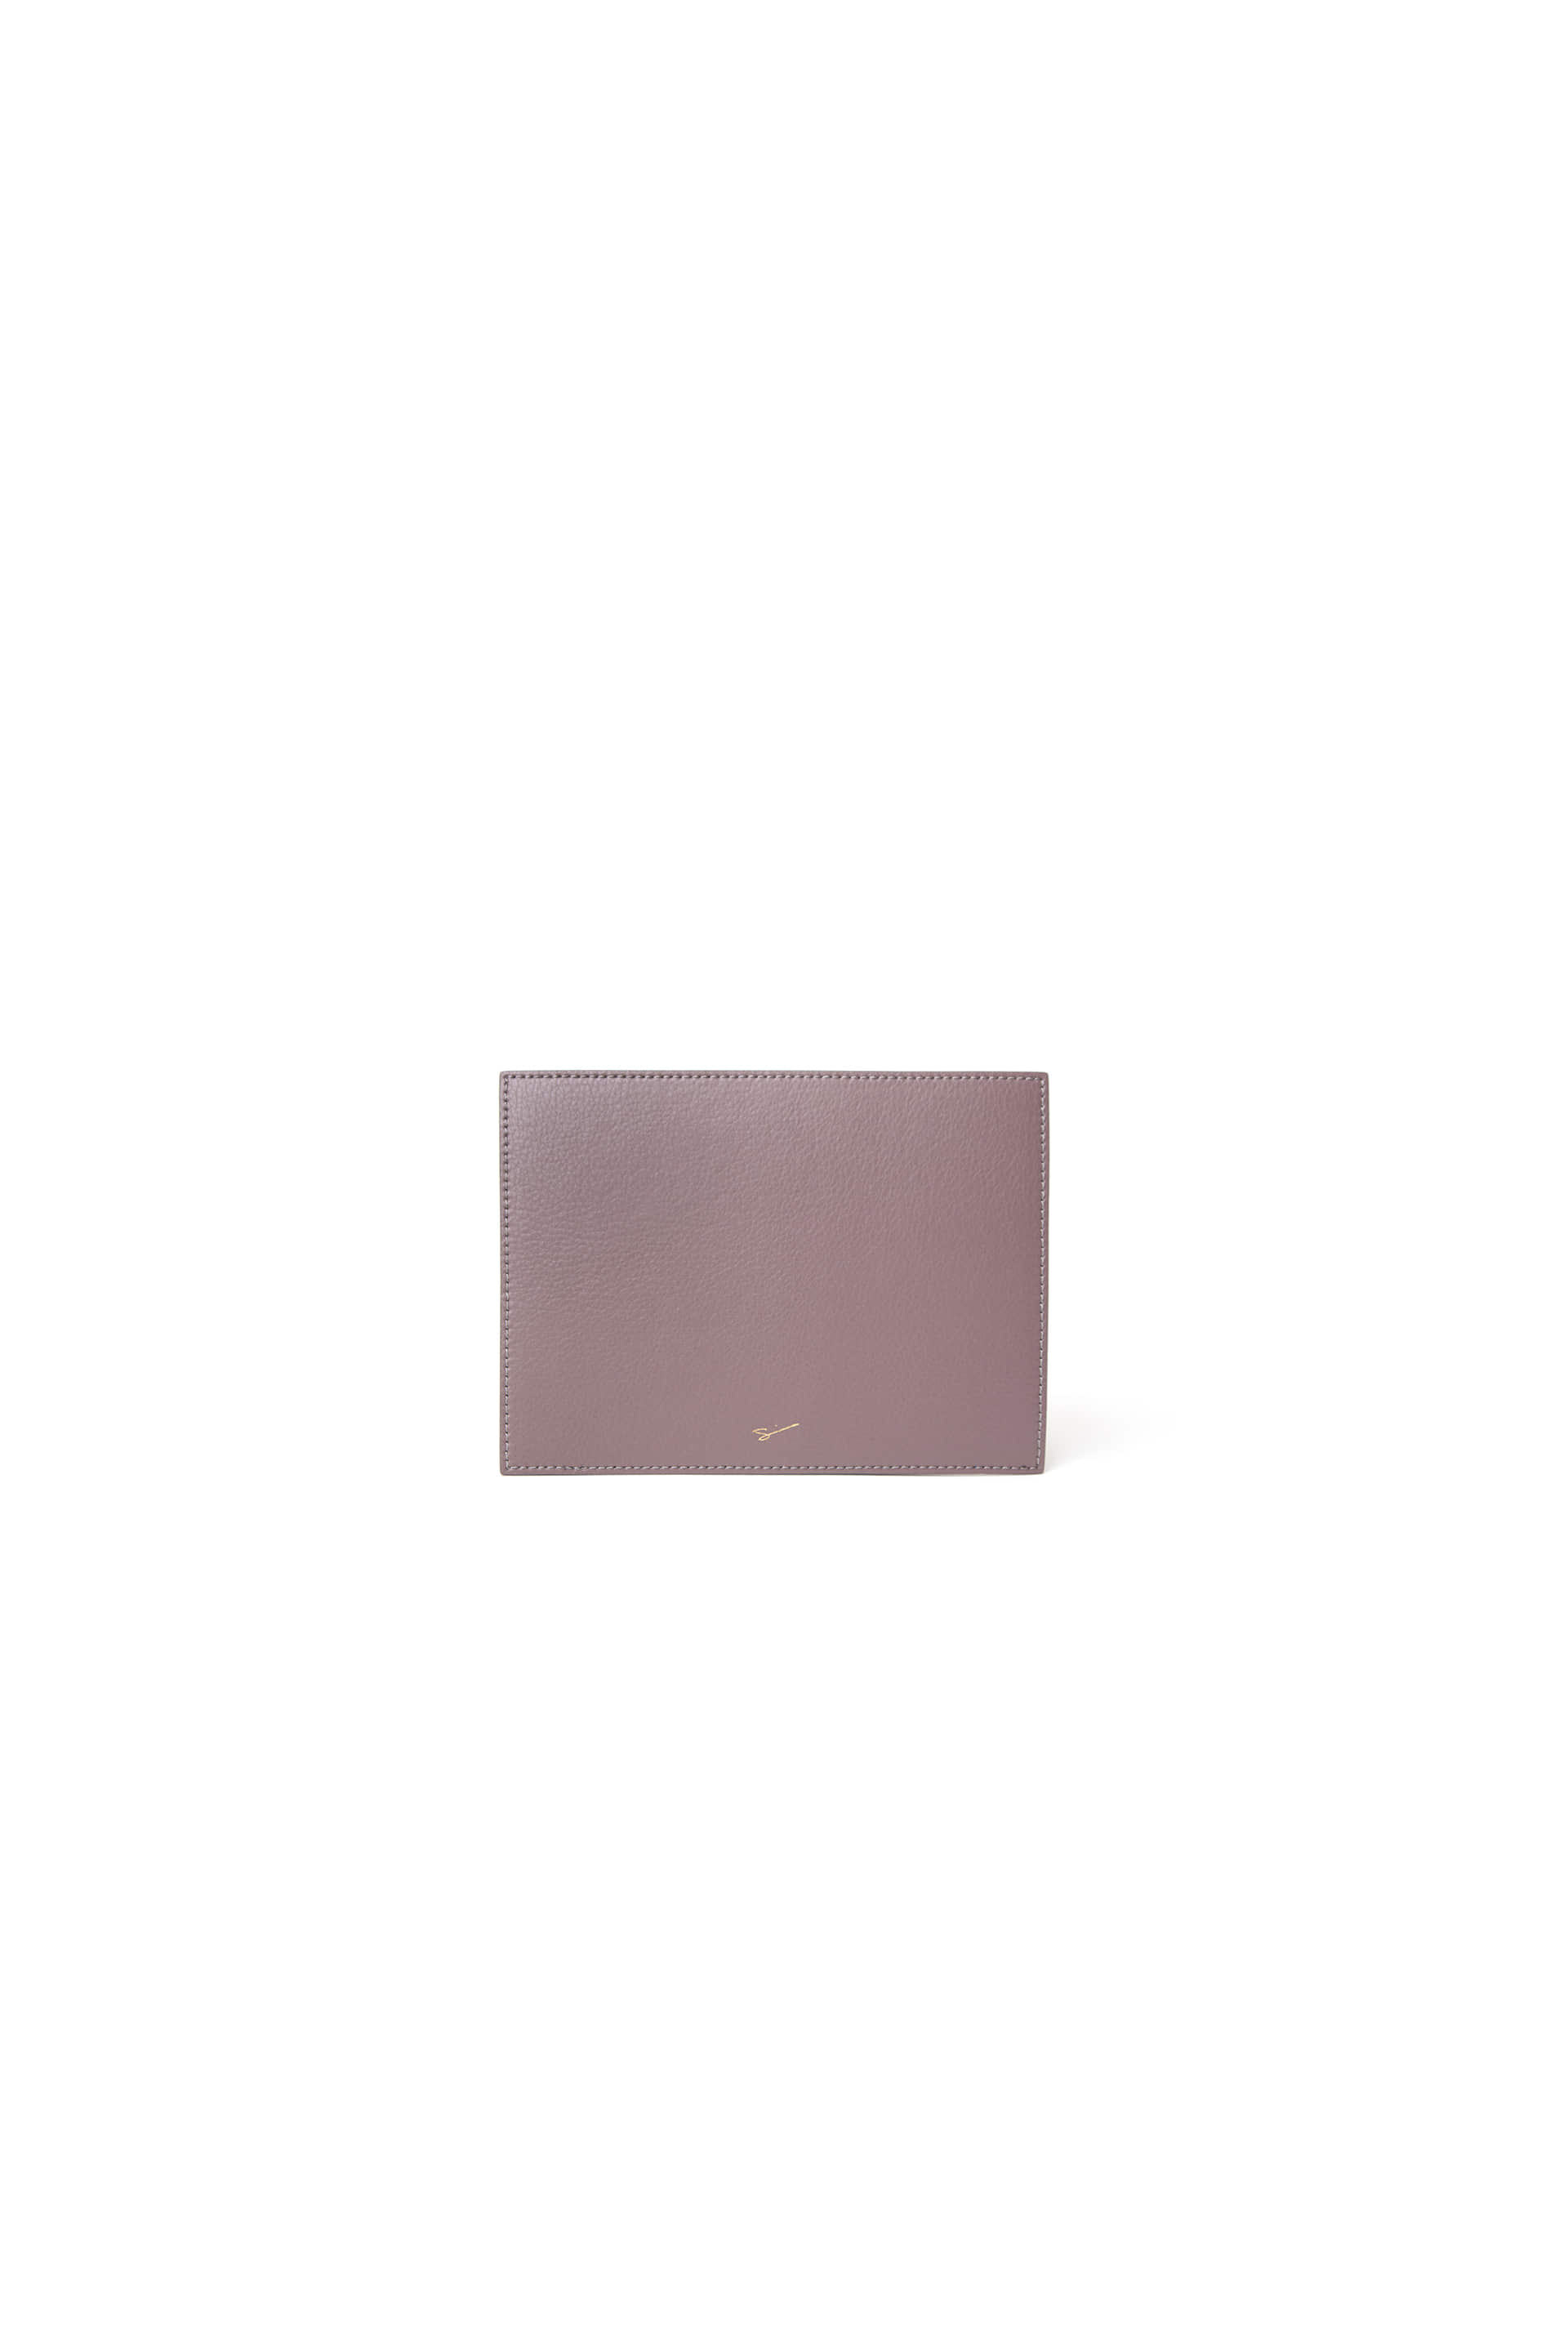 MOUSE PAD 19 Mulberry Purple